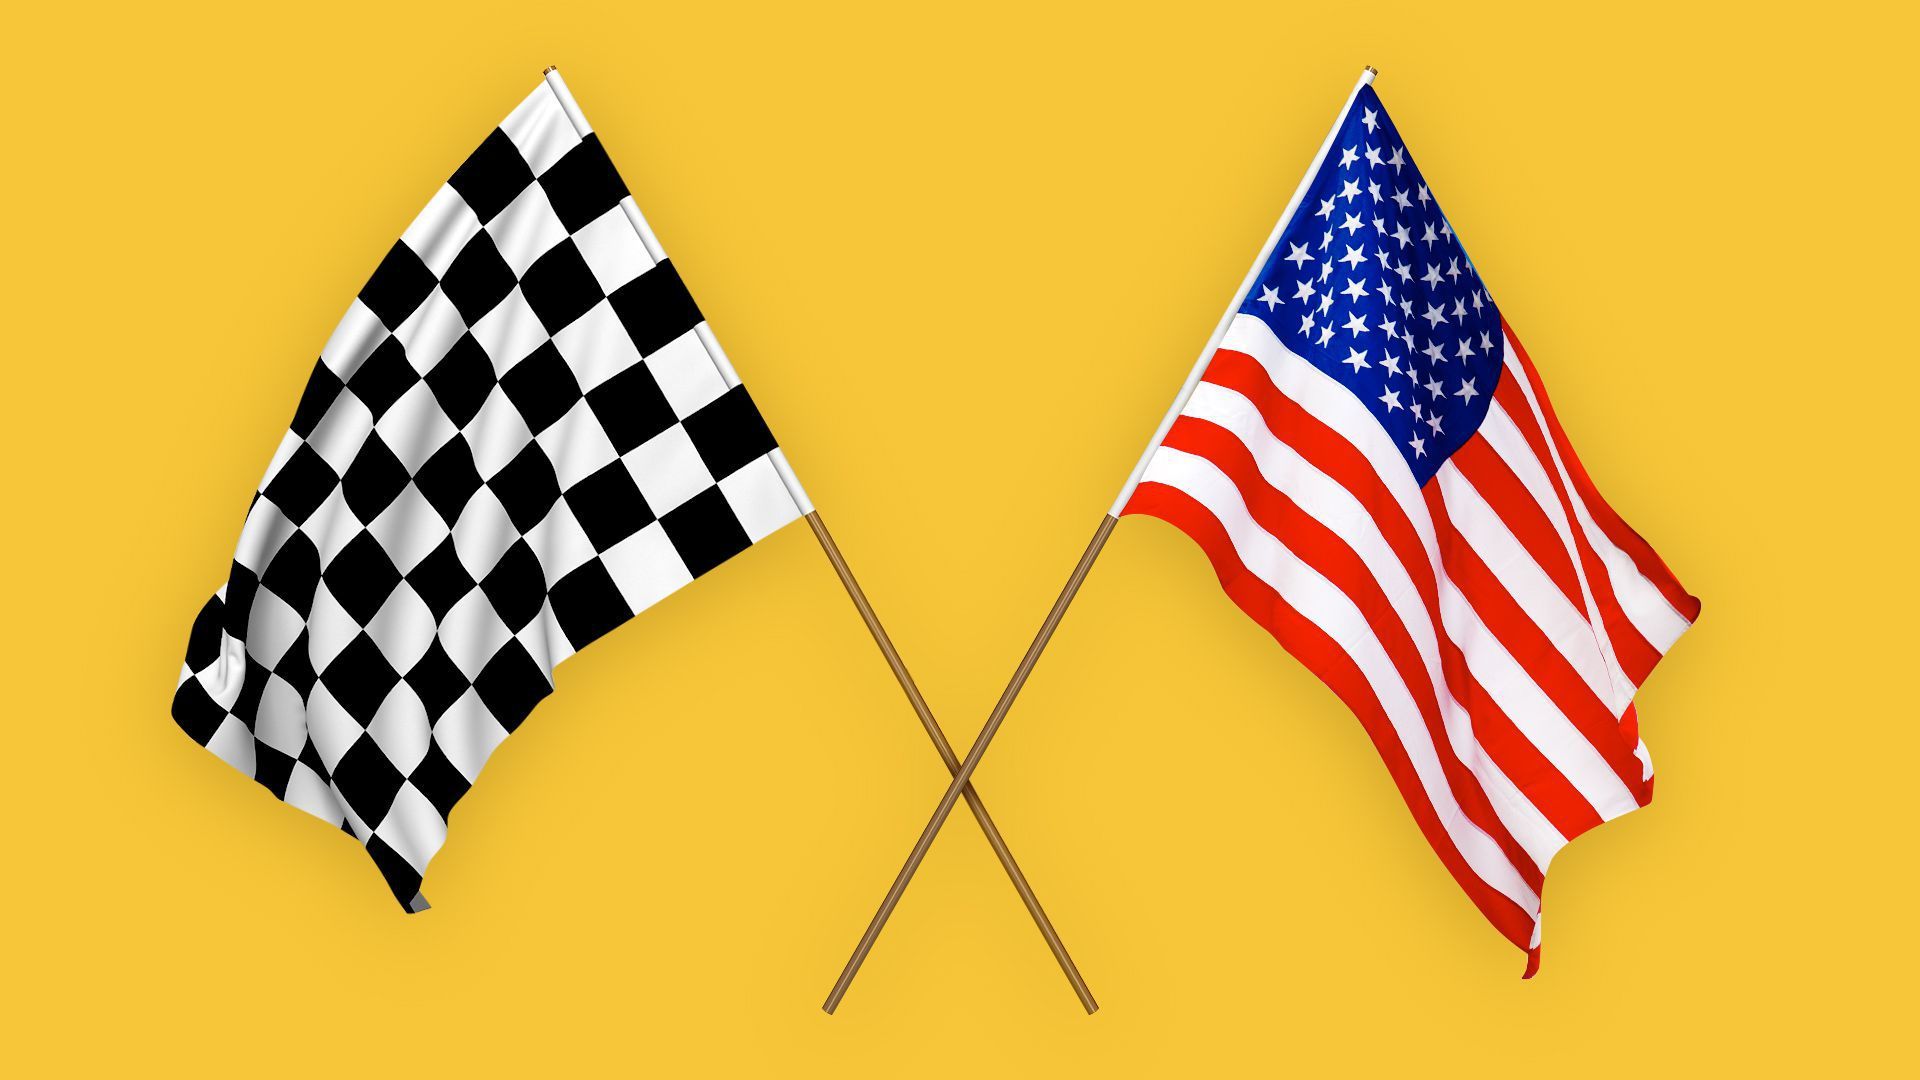 Illustration of a checkered flag with the U.S. flag.